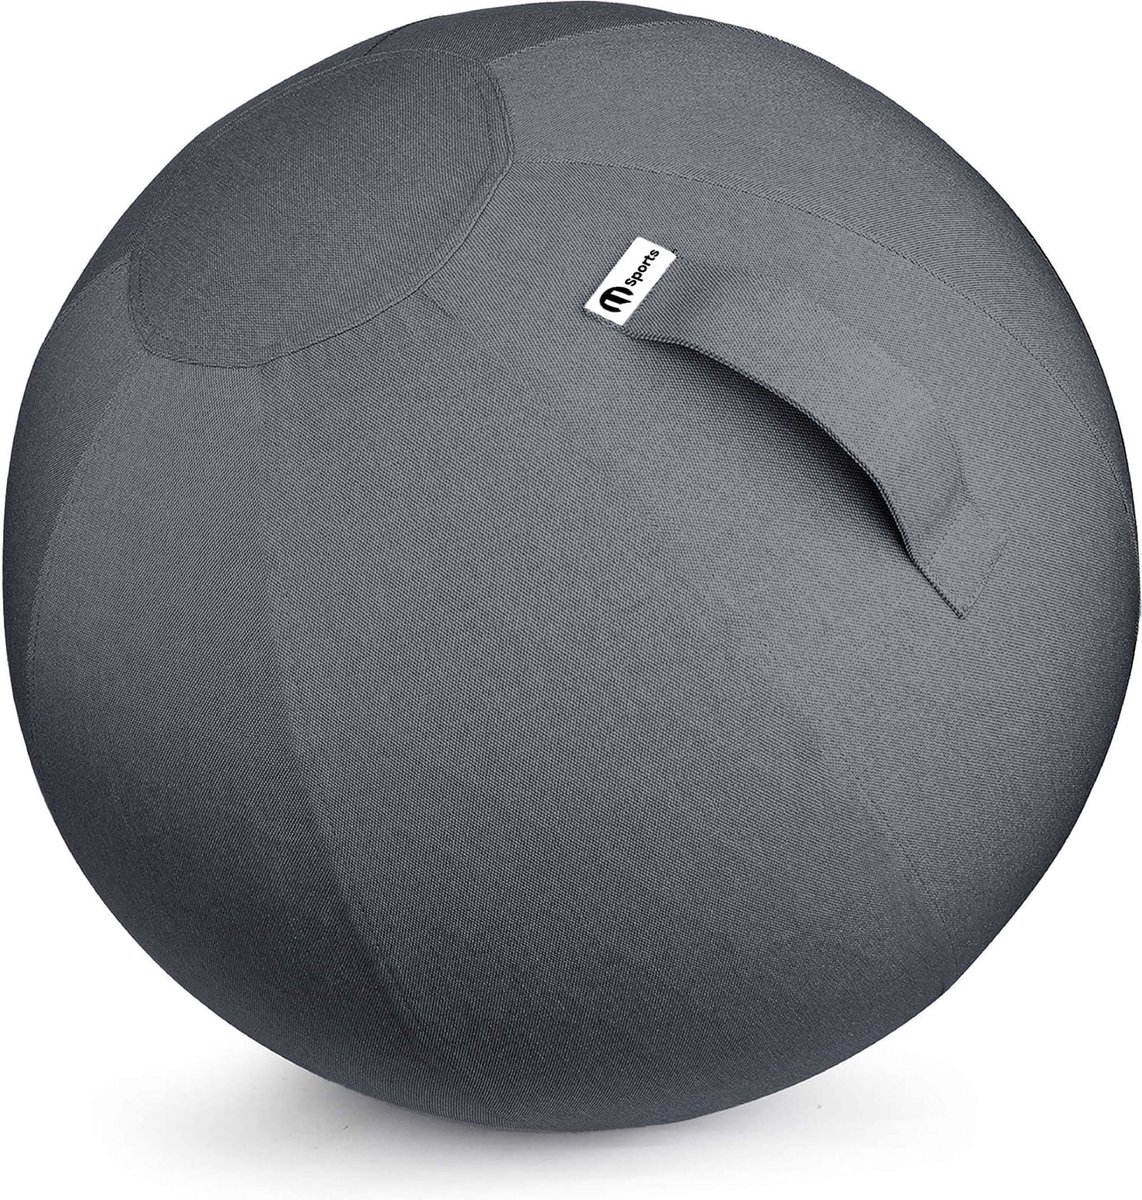 M sports - Fitness Yoga Bal Exercise Ball Gym Bal 75 cm - incl wasbare hoes - incl pomp - Grijs